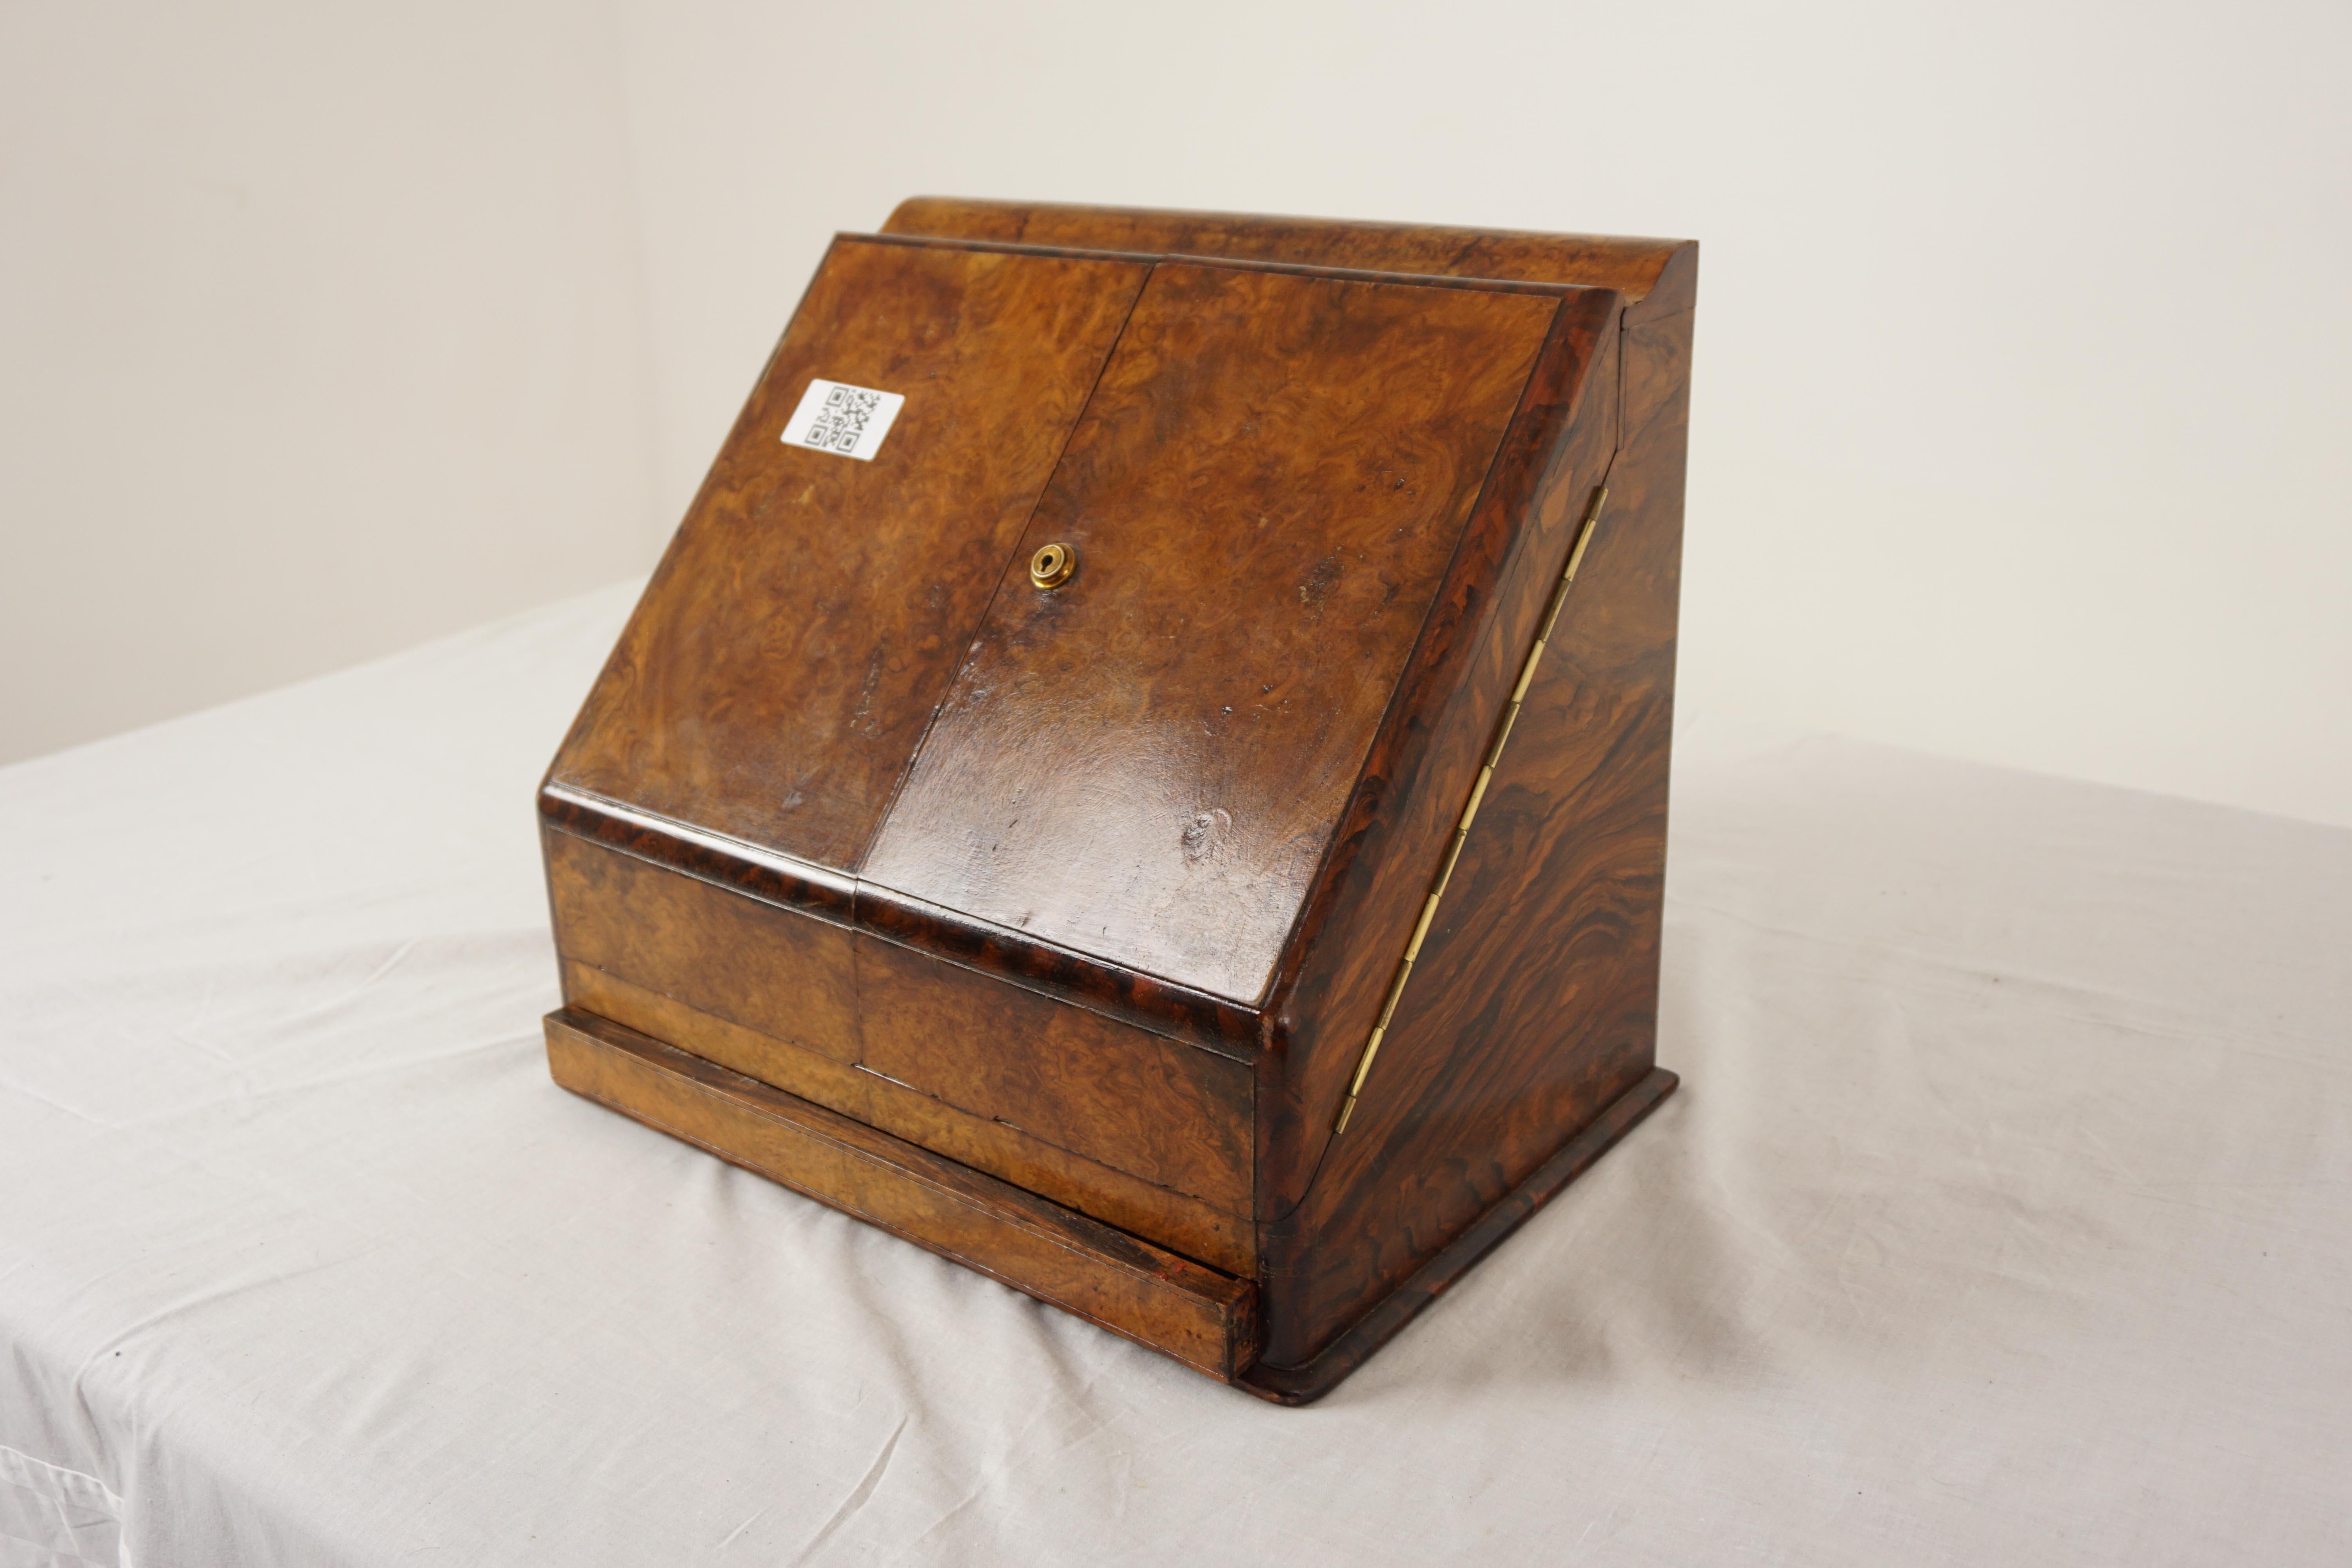 Antique Victorian Burr Walnut Stationary Box, Letter Rack, Writing Box, Scotland 1880, H970

Scotland 1880
Solid Walnut and Veneers
Original Finish
Shaped front upright form consisting of two front doors over a drawer on the base
Opens to